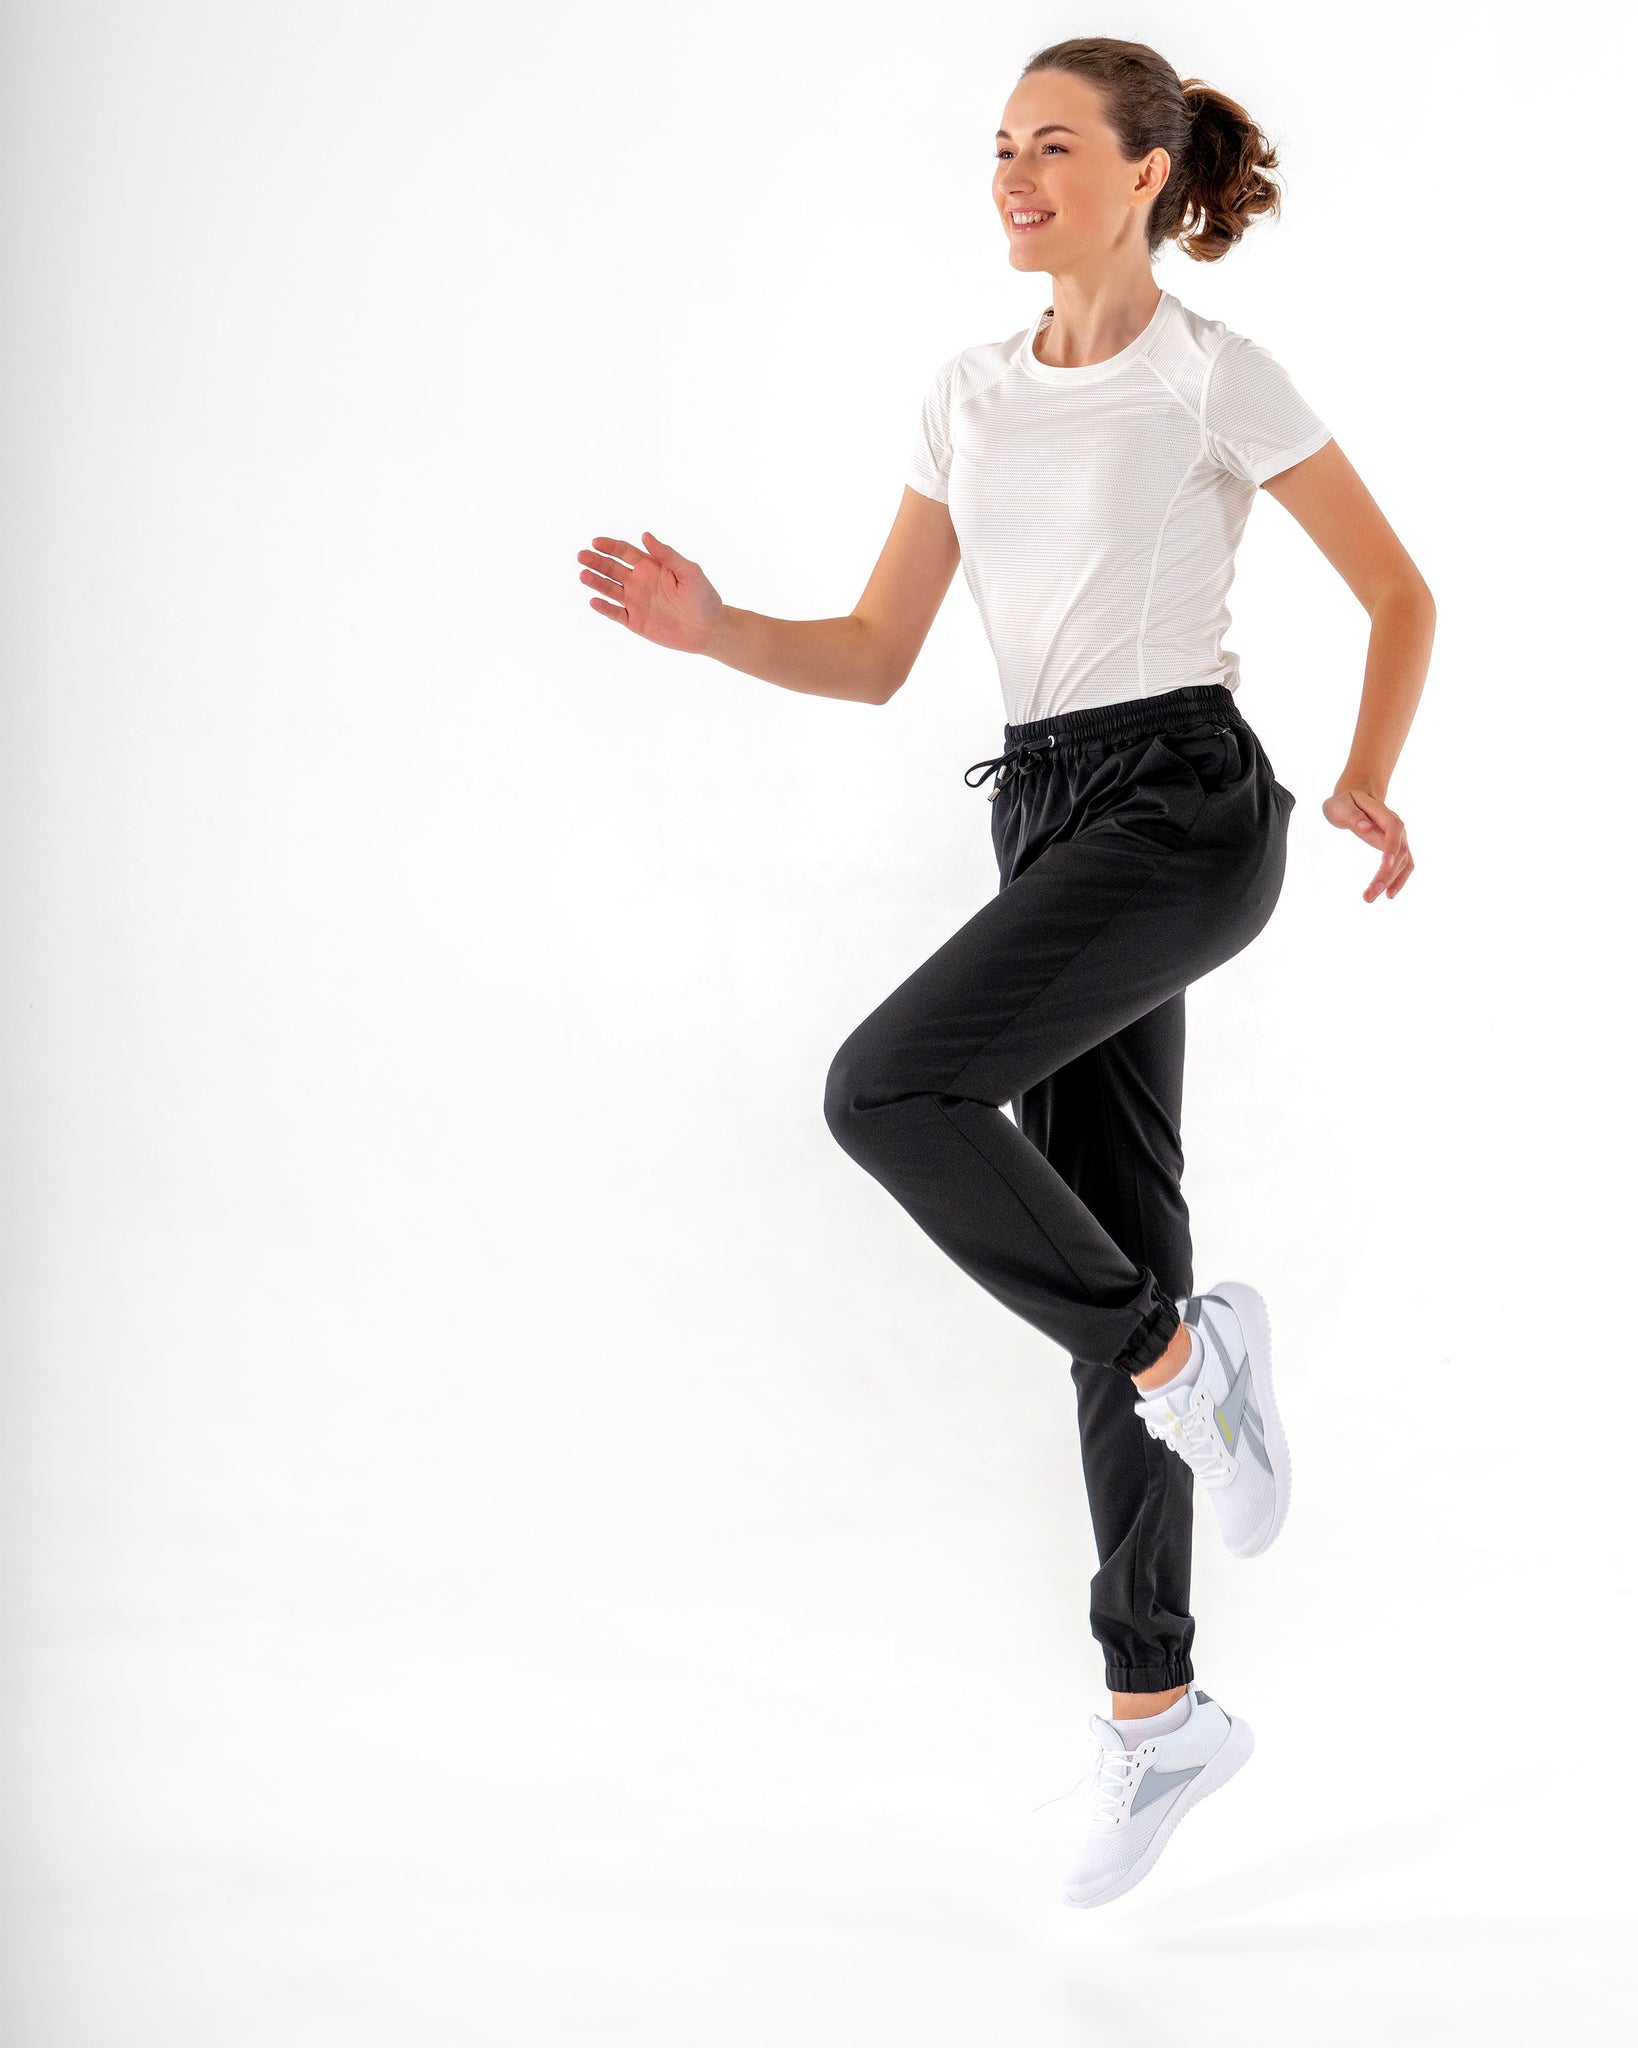 Glider Drawstring Jogger in Black by Veil Garments. Modest activewear collection.